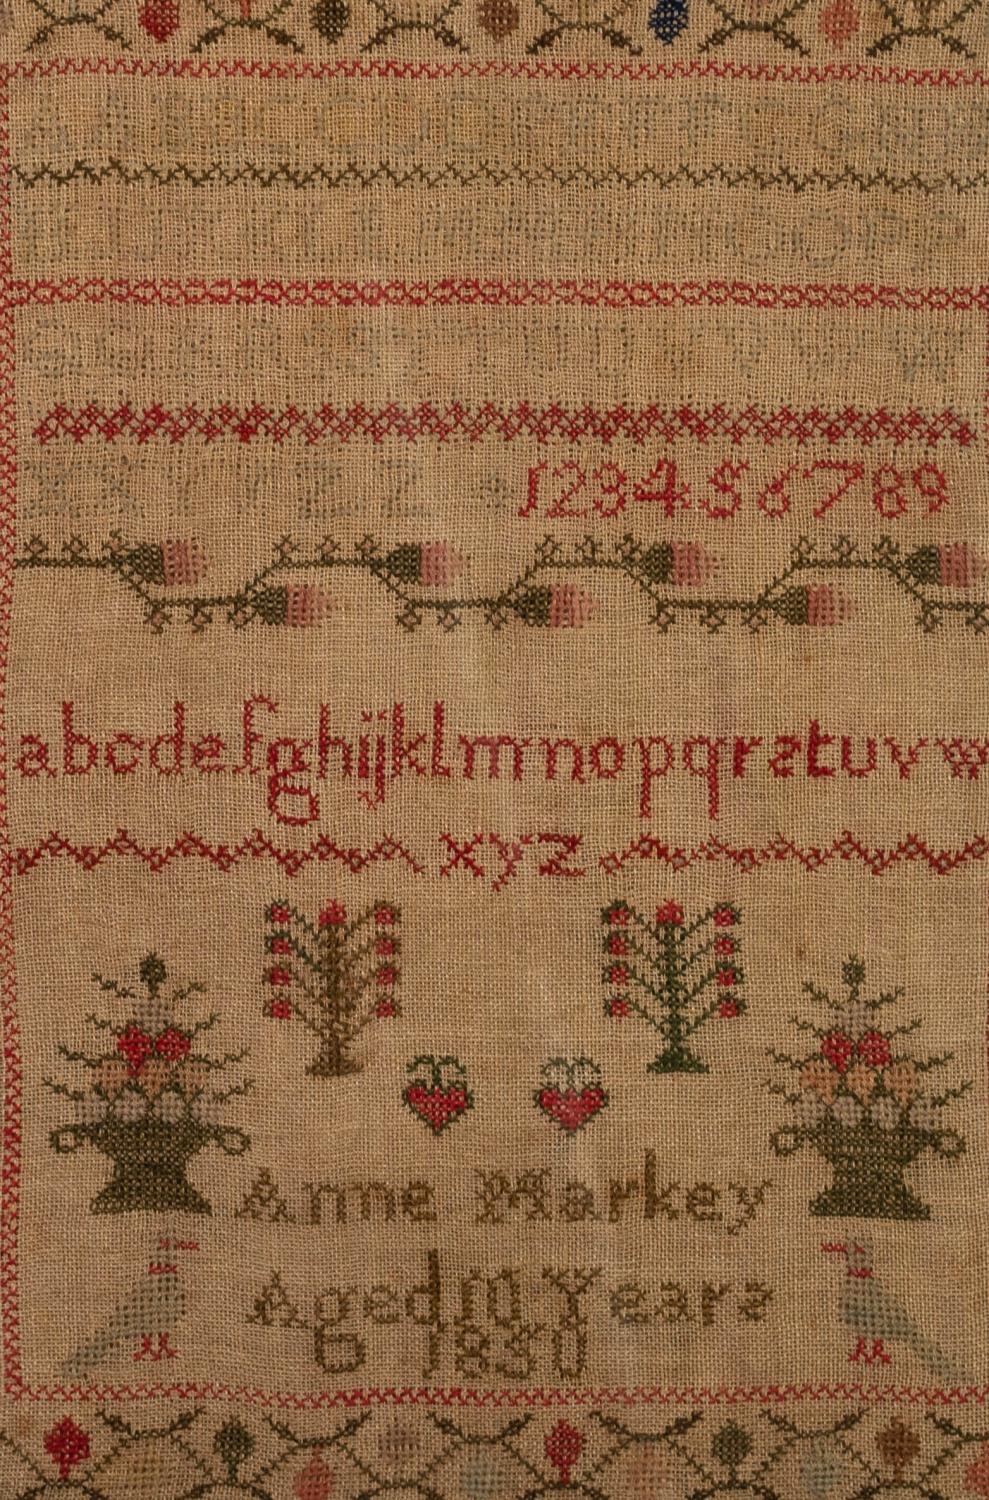 WILLIAM IV ALPHABET SAMPLER DECORATED WITH FLOWERING SHRUBS AND STRAWBERRIES, inscribed Anne